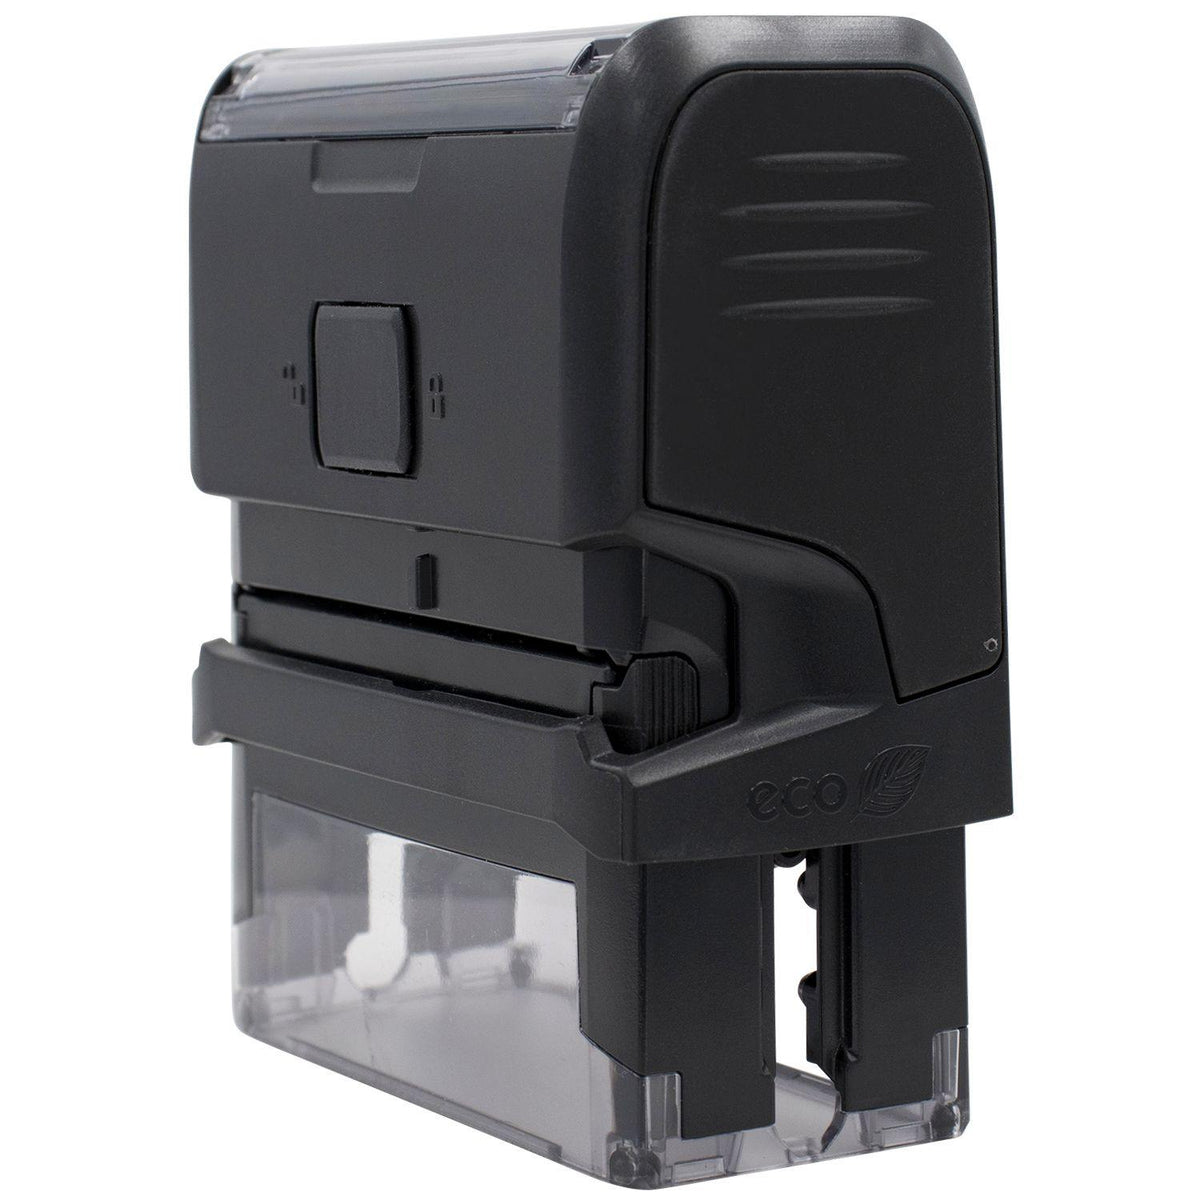 Self Inking Fantastic Stamp - Engineer Seal Stamps - Brand_Trodat, Impression Size_Small, Stamp Type_Self-Inking Stamp, Type of Use_Teacher